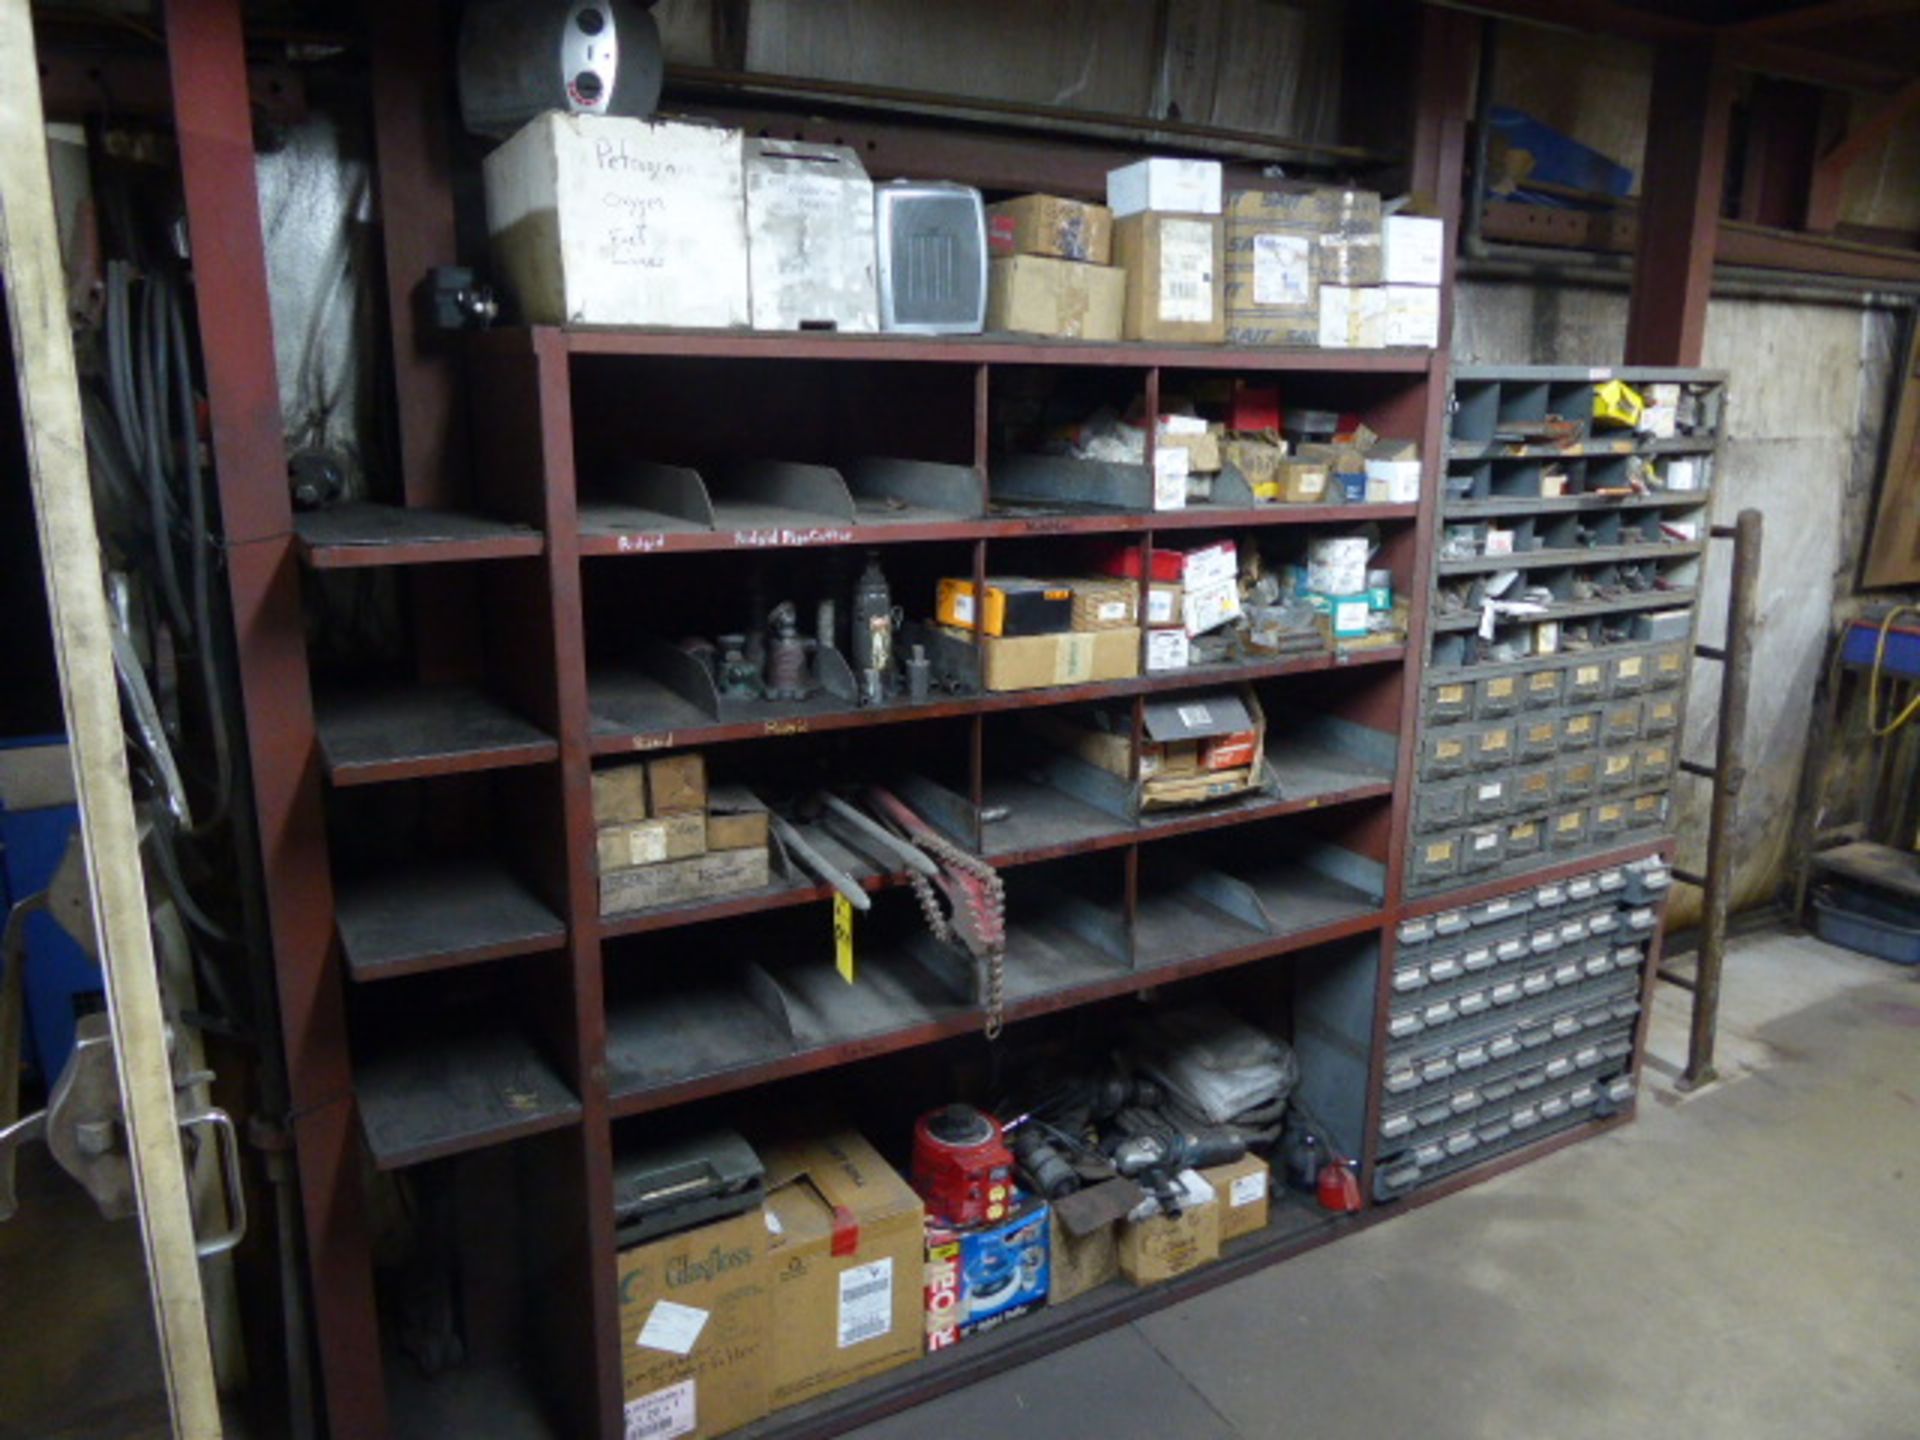 Contents of Rack: Heaters, Pipe Bender, Hydraulic Jacks, Nuts, Bolts, Screws, Etc. (Lot)